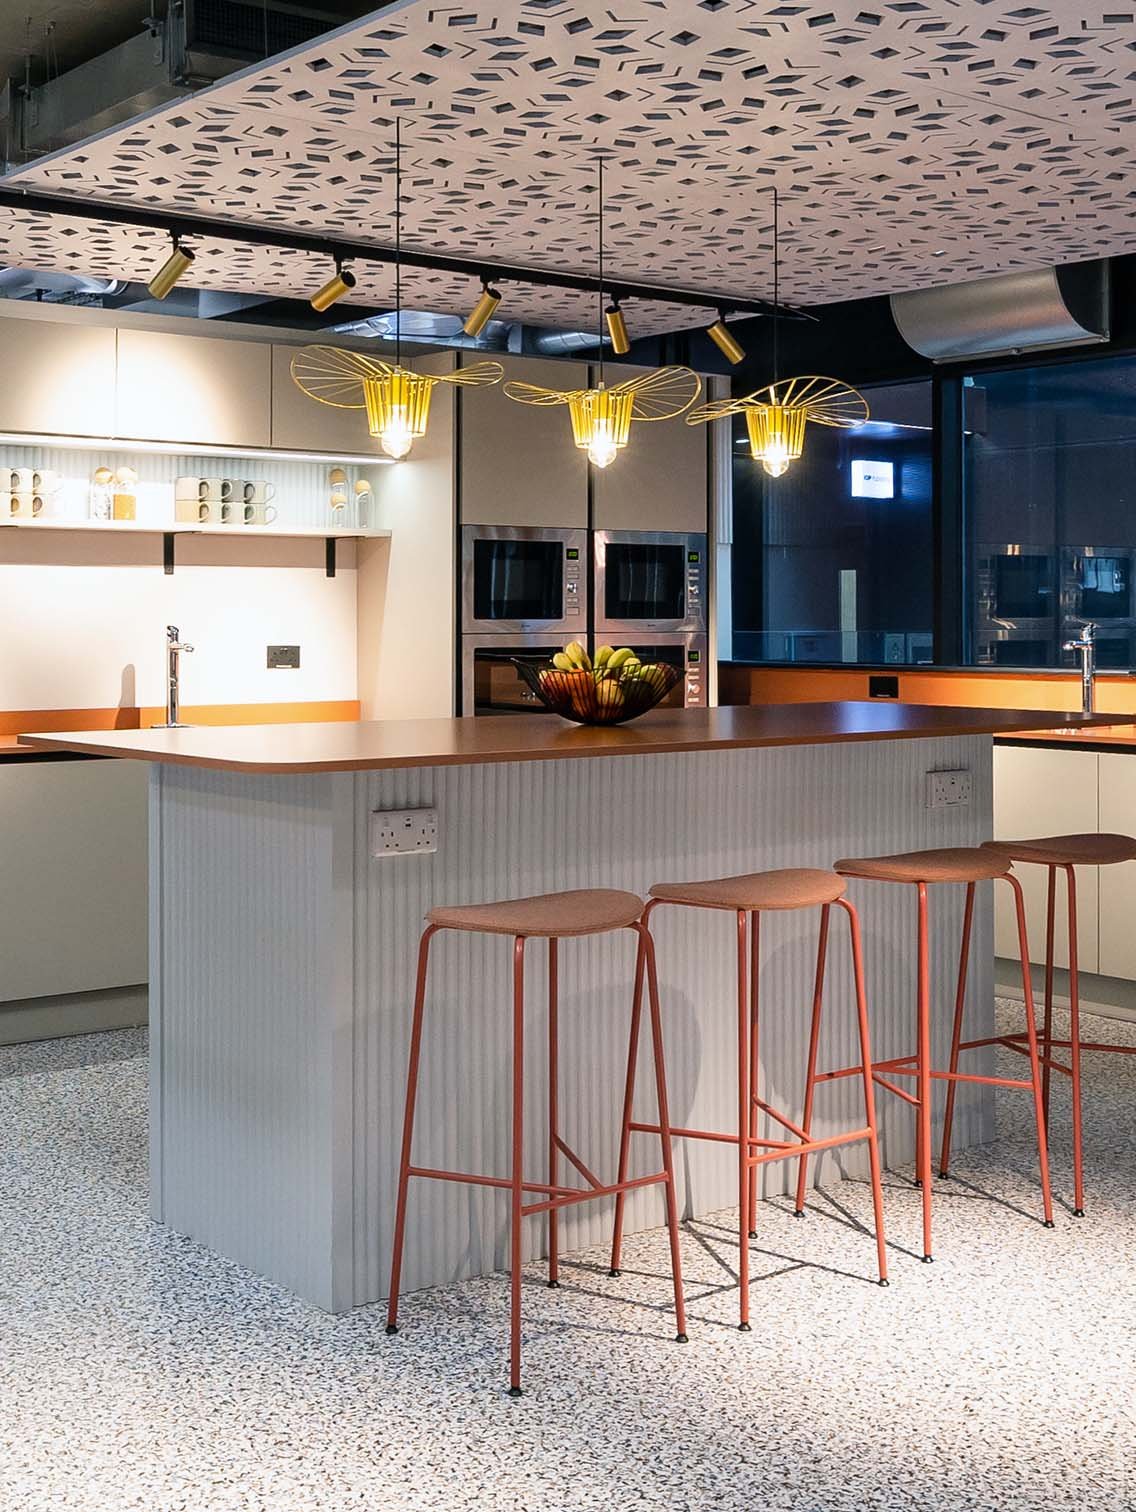 Teapoint-in-IOP-Publishing-Bristol-with-feature-ceiling-acoustic-pannels-and-bold-pendant-lighting.jpg